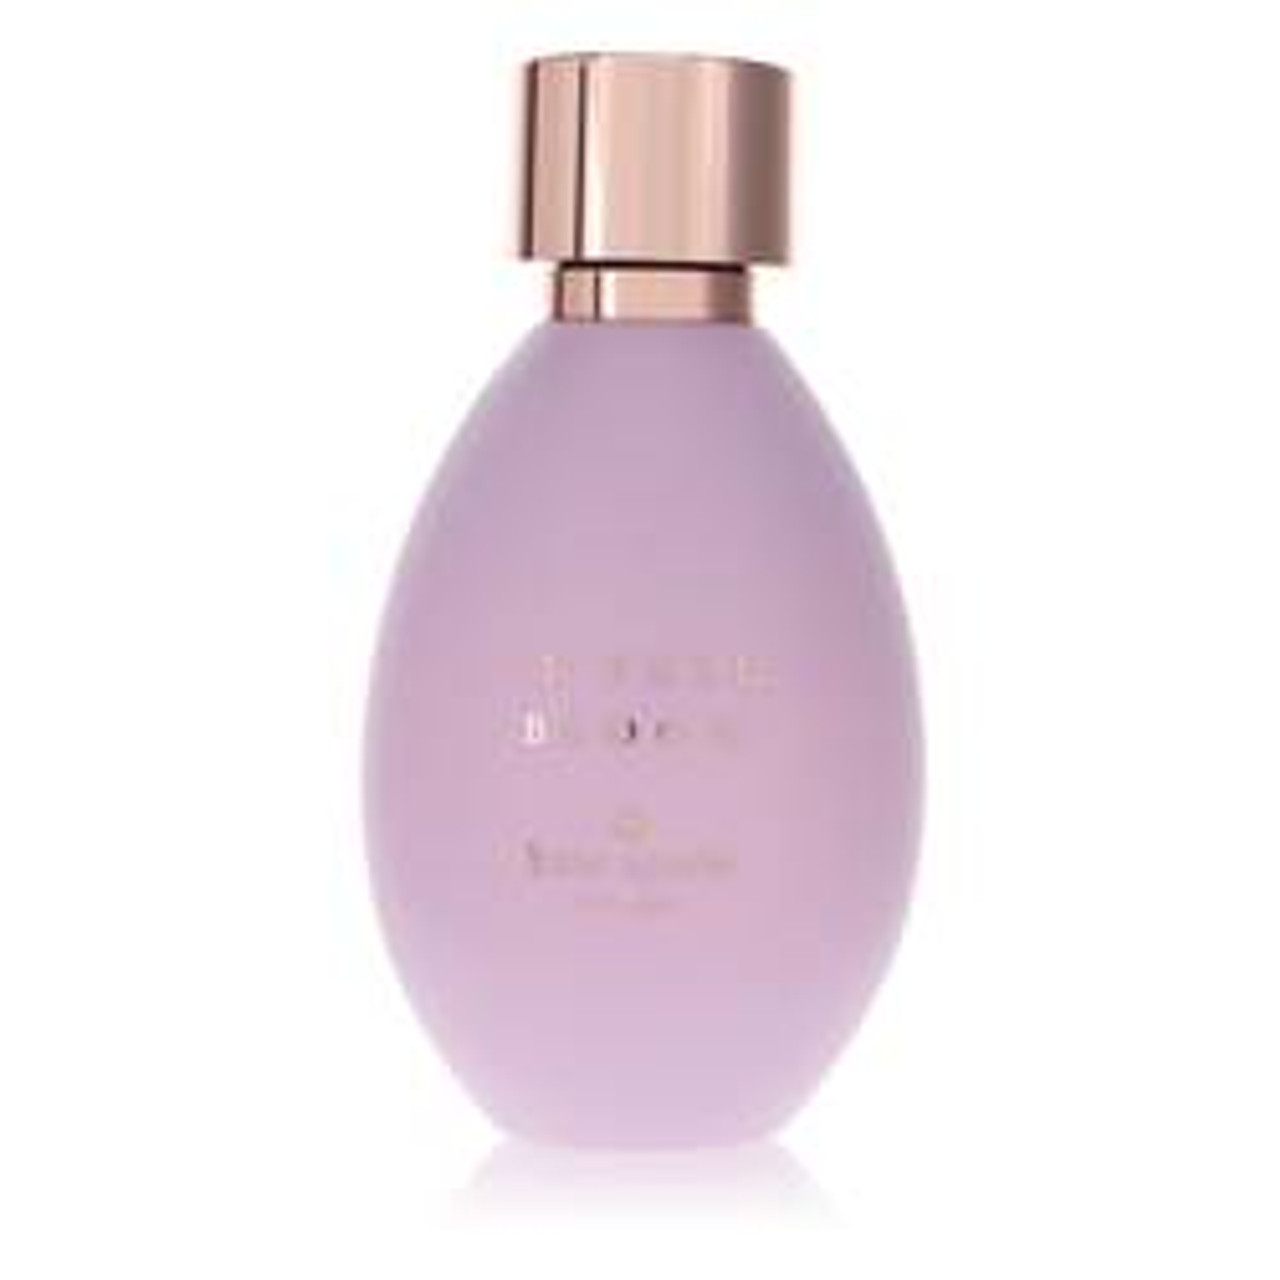 In Full Bloom Perfume By Kate Spade Body Lotion (Tester) 6.8 oz for Women - [From 31.00 - Choose pk Qty ] - *Ships from Miami